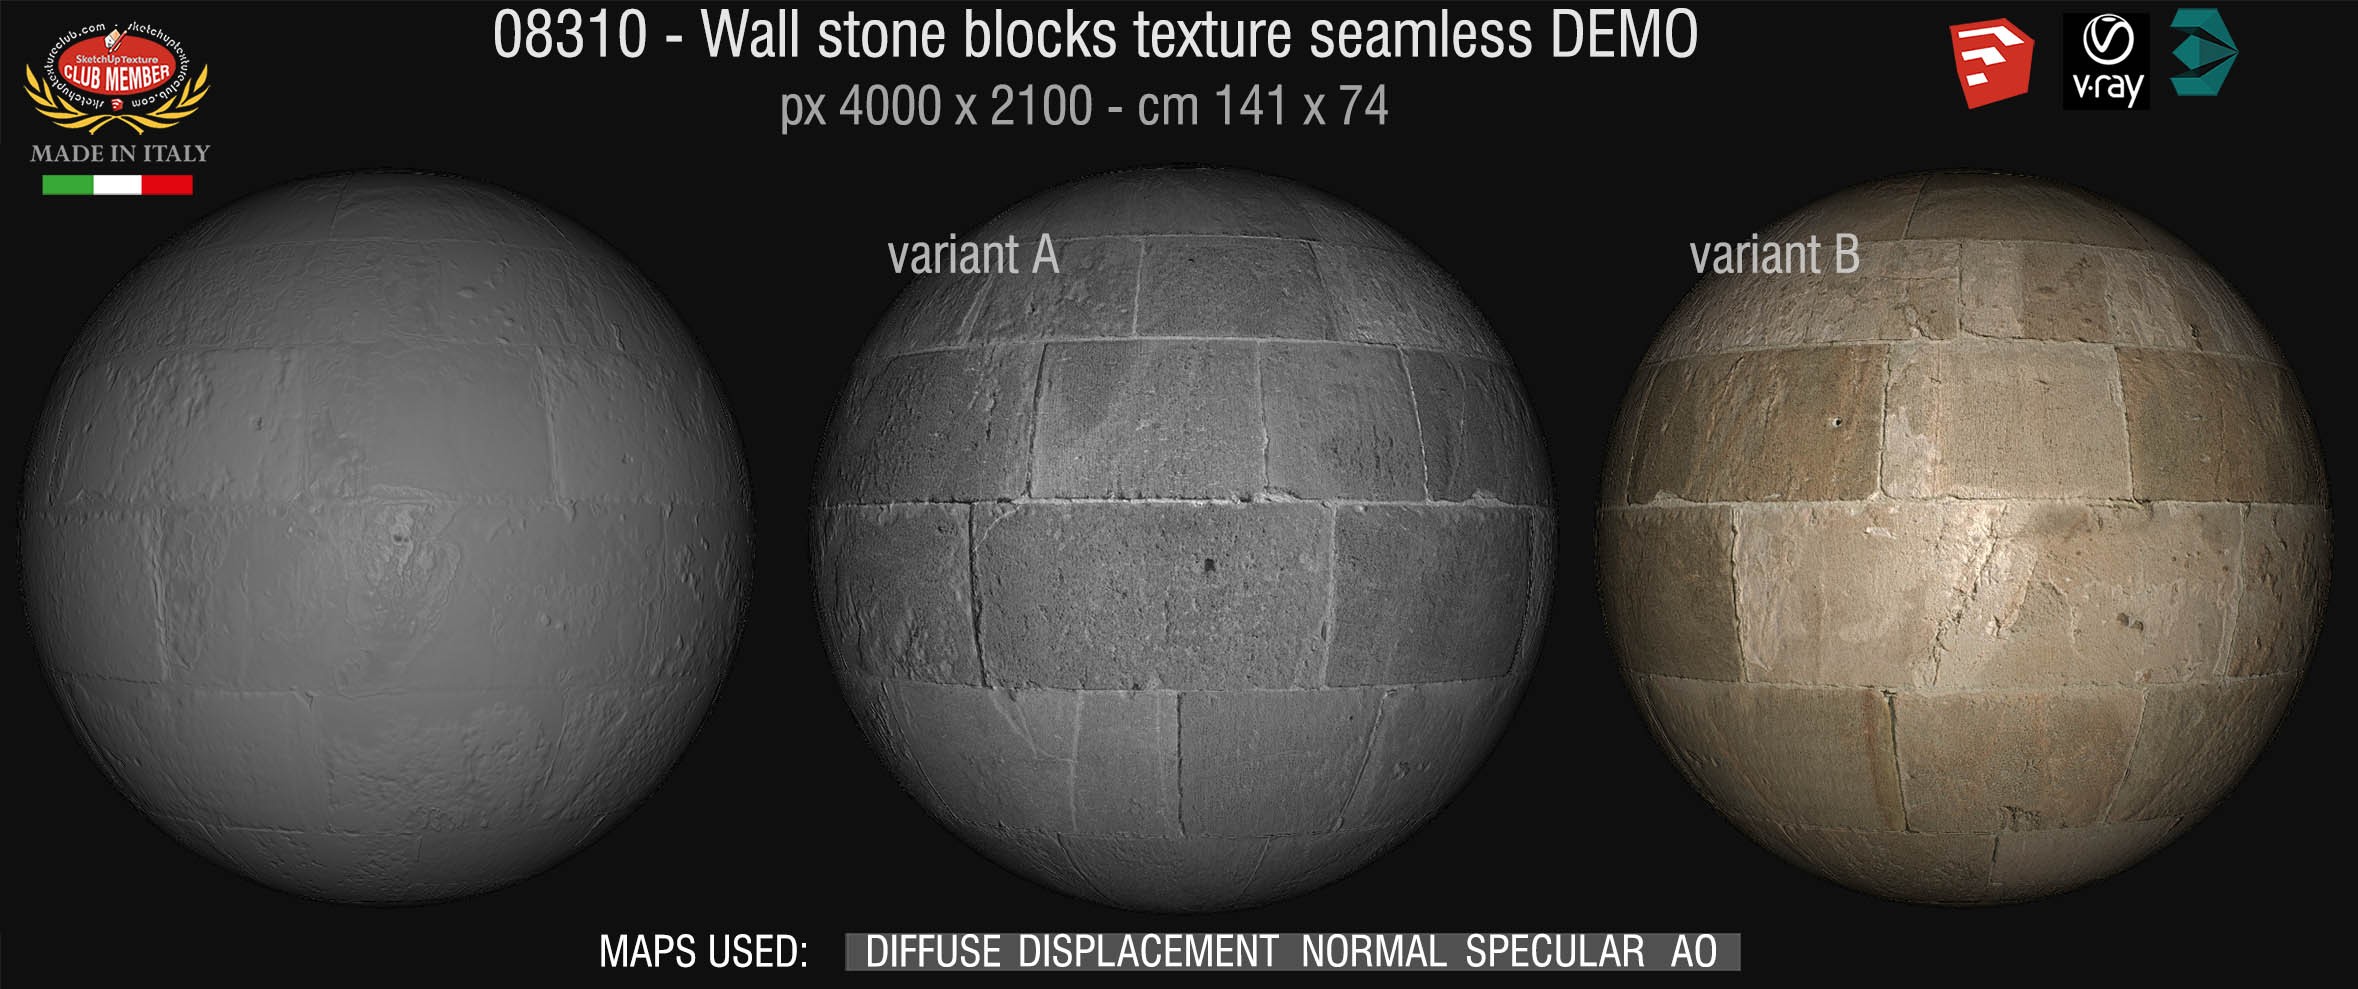 08310 HR Wall stone with regular blocks texture + maps DEMO